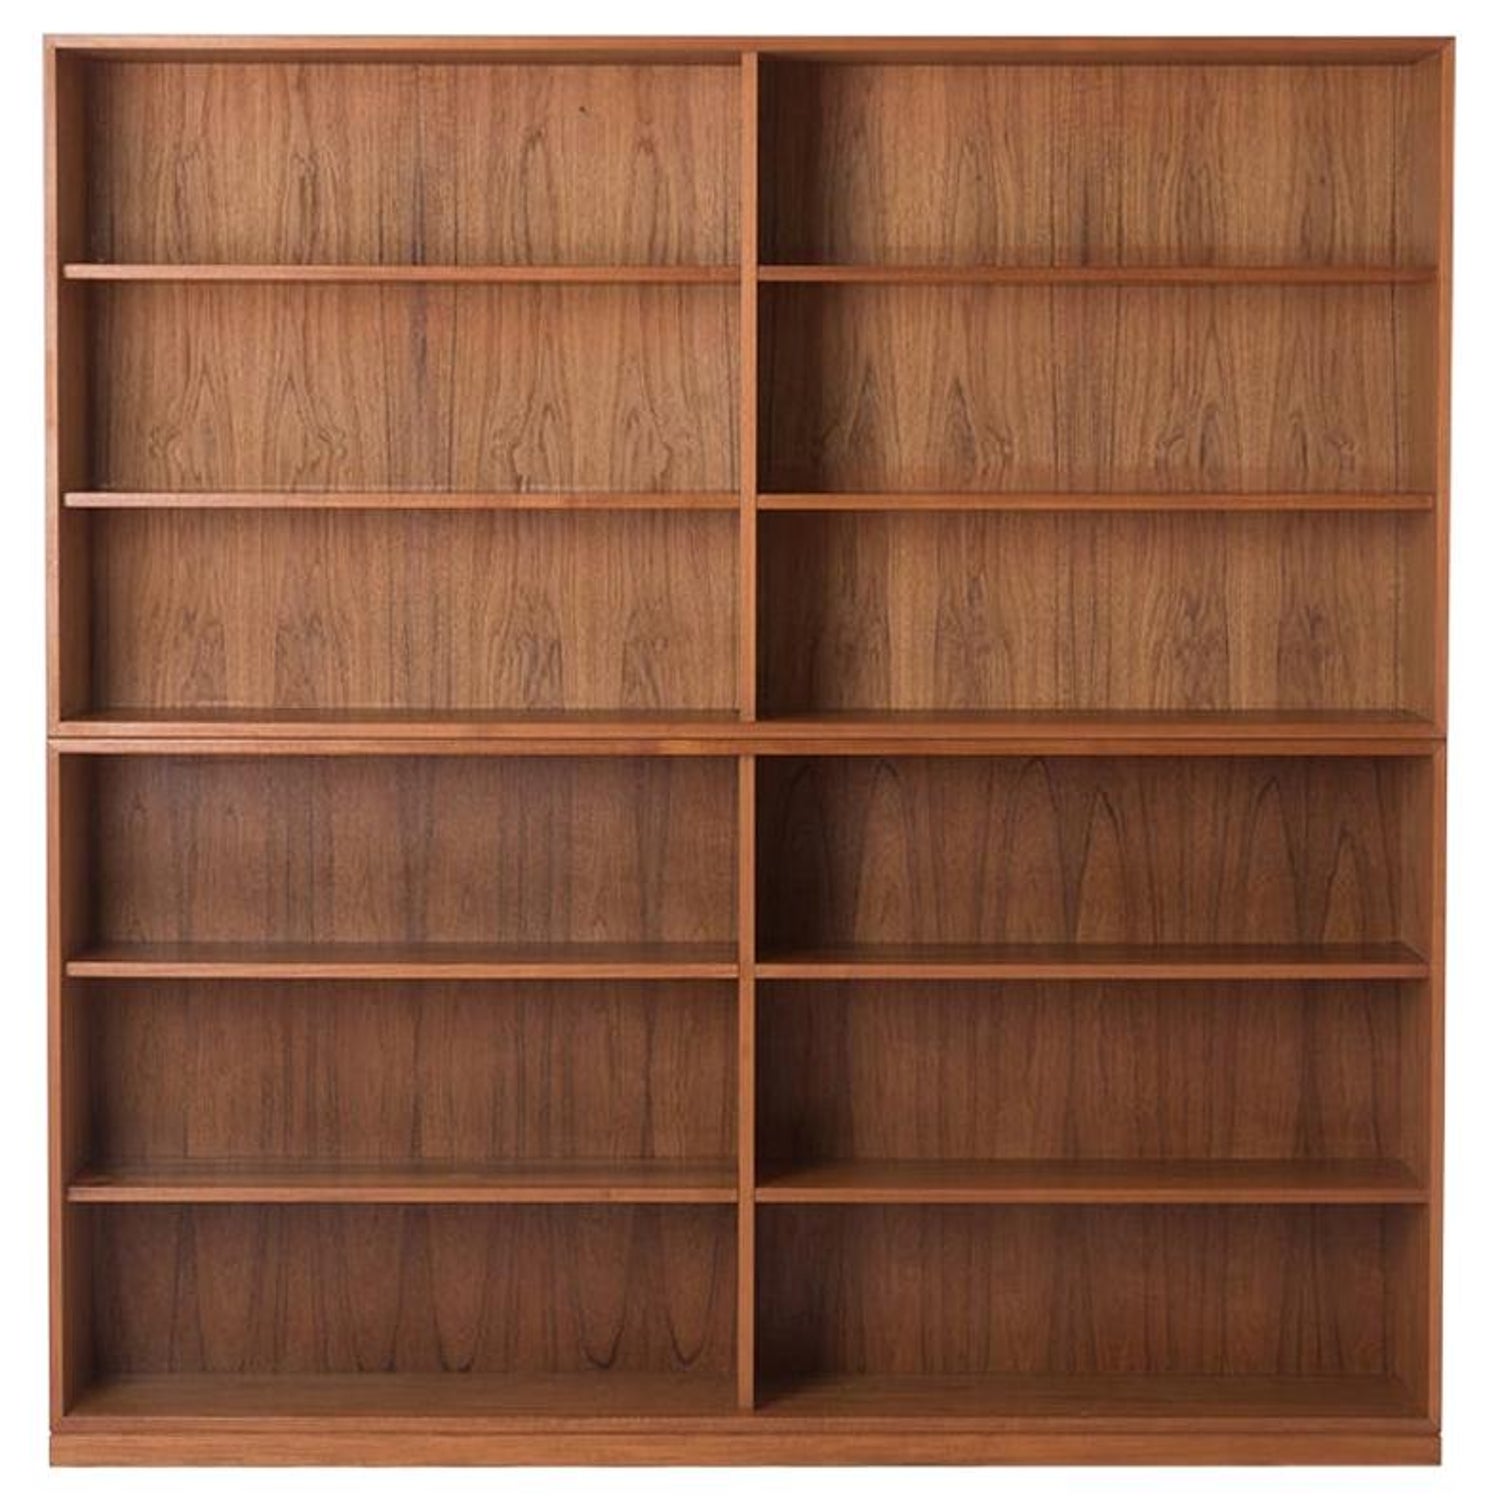 Teak Tall Double Modular Bookcase With, Tall Book Shelves With Doors